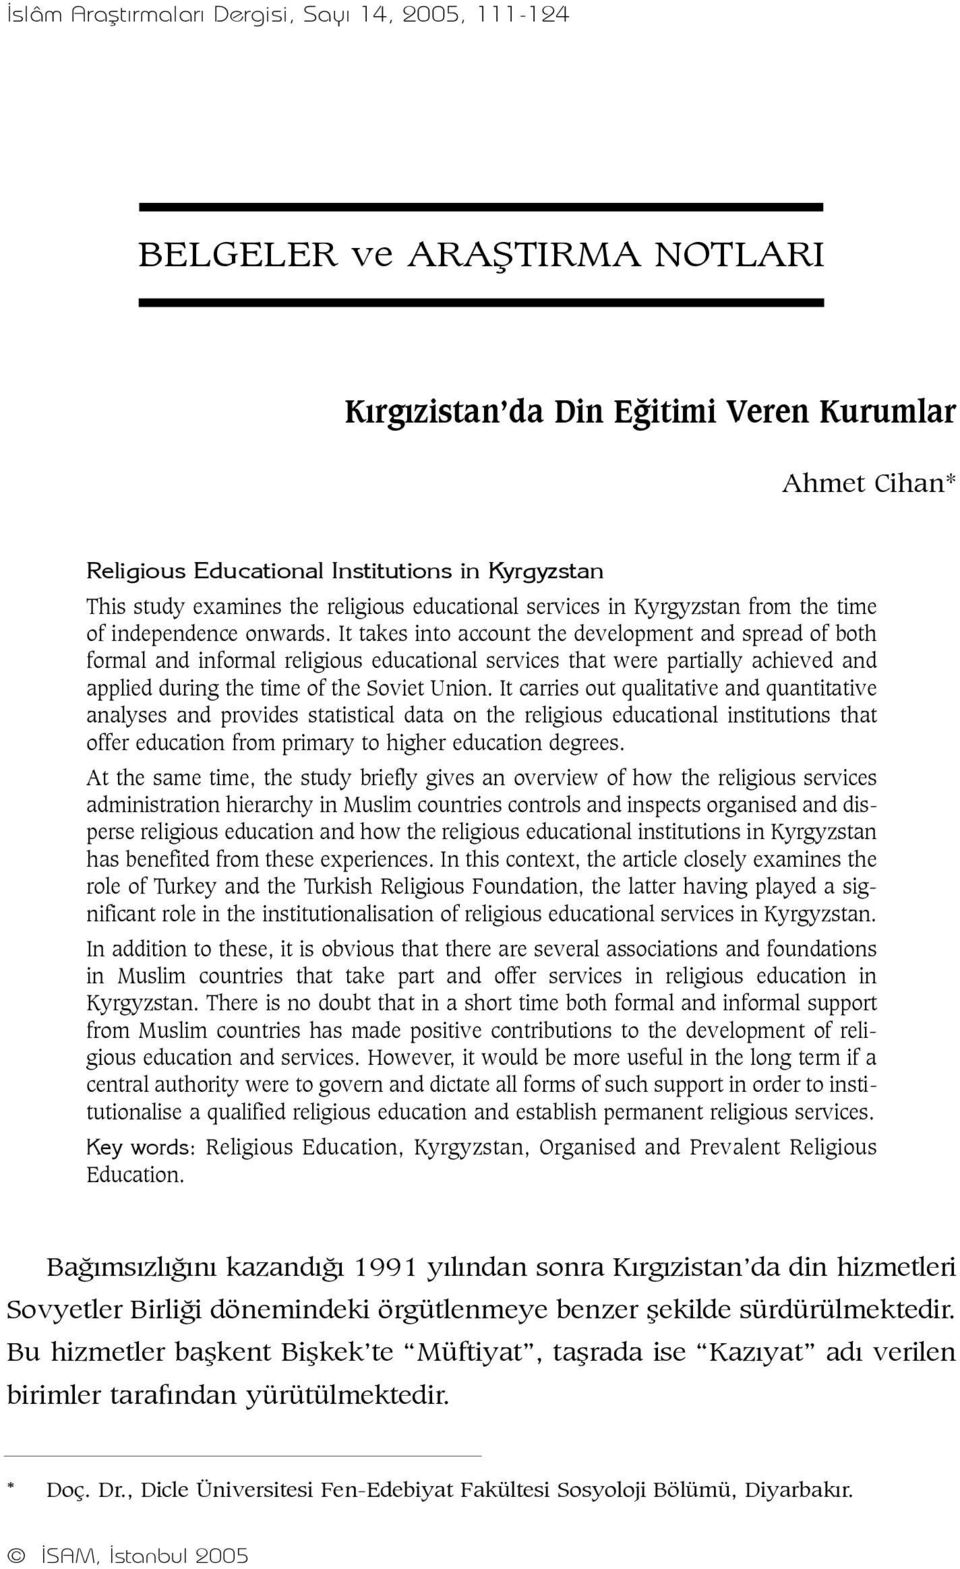 It takes into account the development and spread of both formal and informal religious educational services that were partially achieved and applied during the time of the Soviet Union.